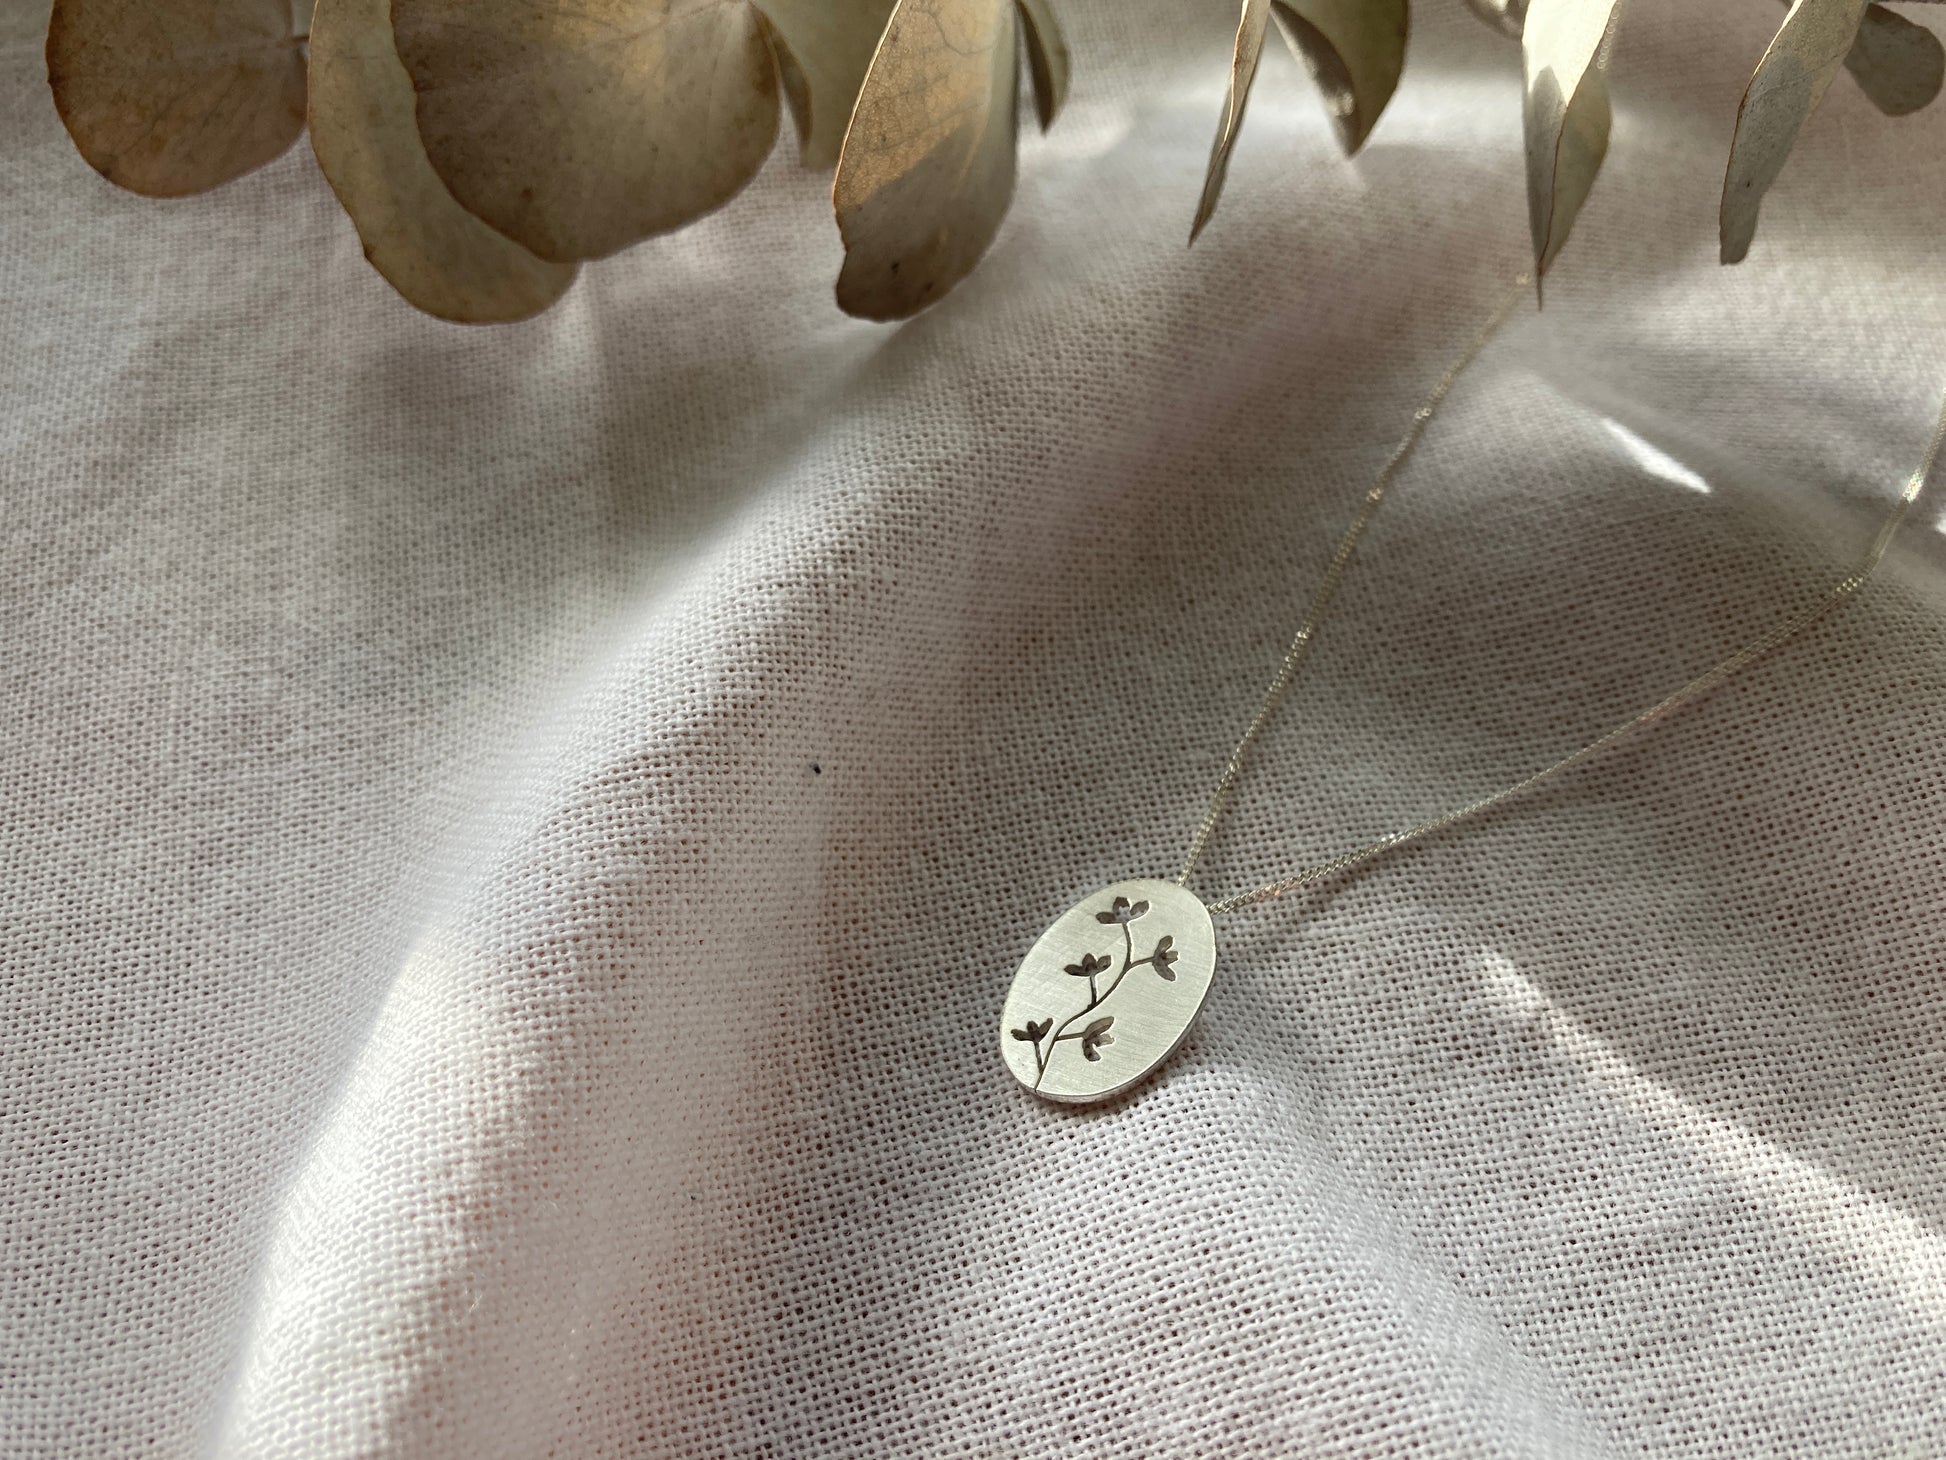 Botanical Collection Oval Pendant with Botanical cut-out inspired by flowers in Bloom